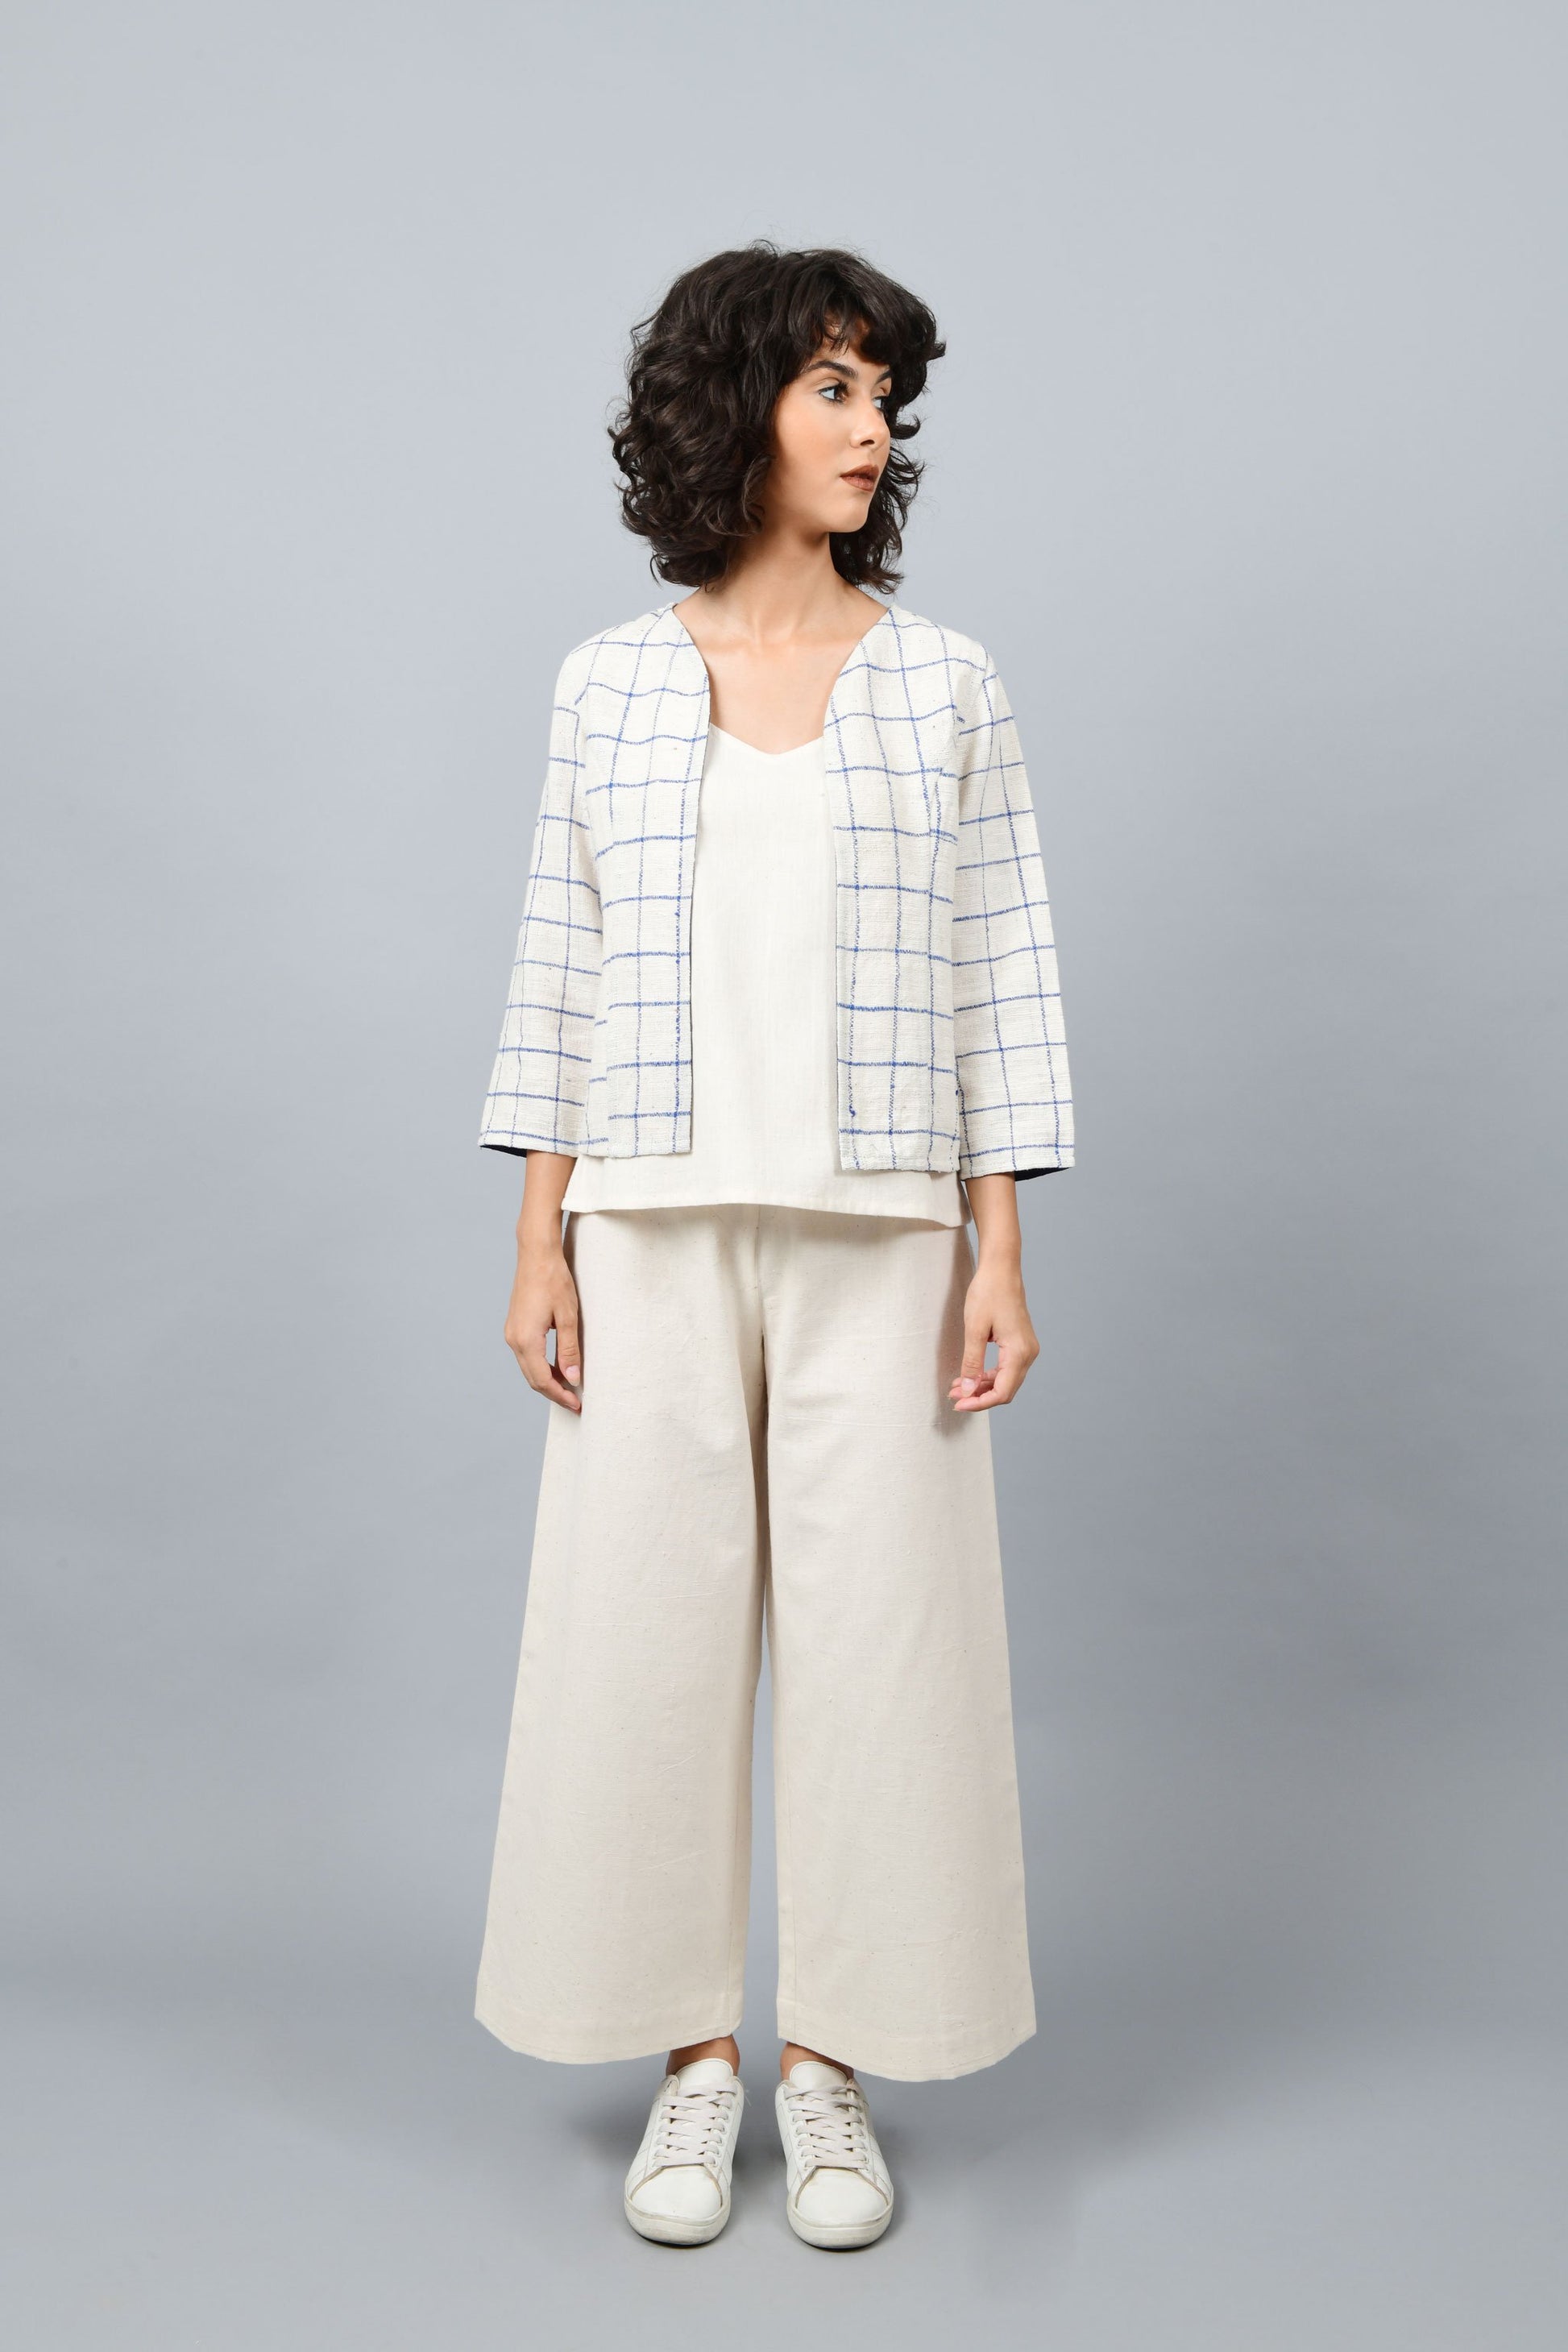 Model posing for the camera wearing open short jacket in thicker white handspun and handwoven khadi cotton with big blue checks over off-white spaghetti top and off-white palazzos paired with white sneakers.